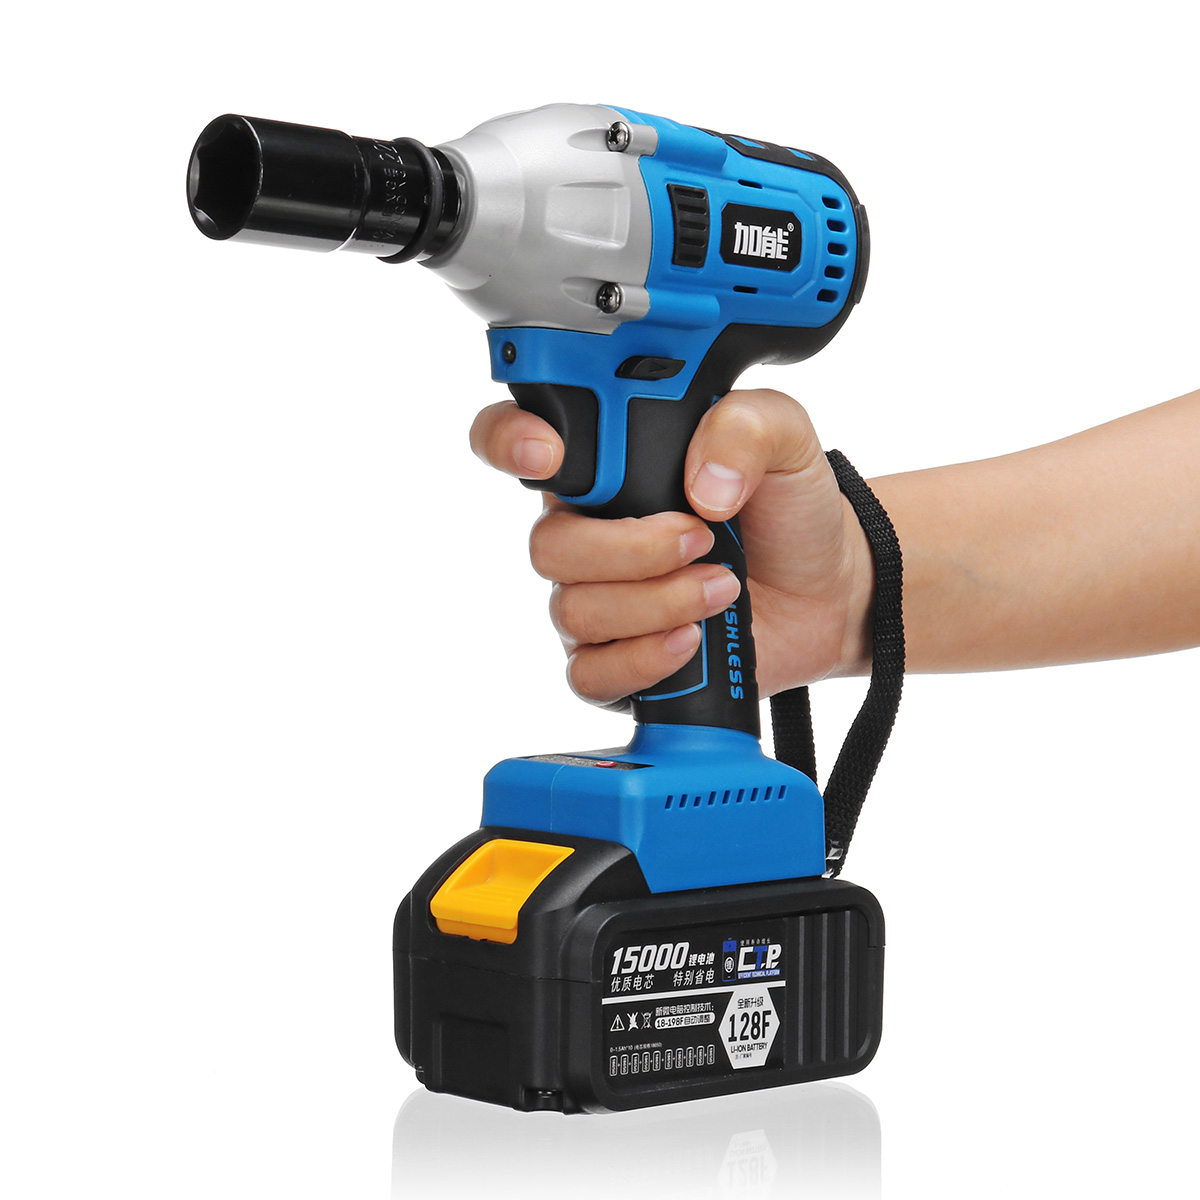 15000mAh-Electric-Impact-Wrench-340Nm-Cordless-Brushless-with-2-Lithium-Battery-1392865-7